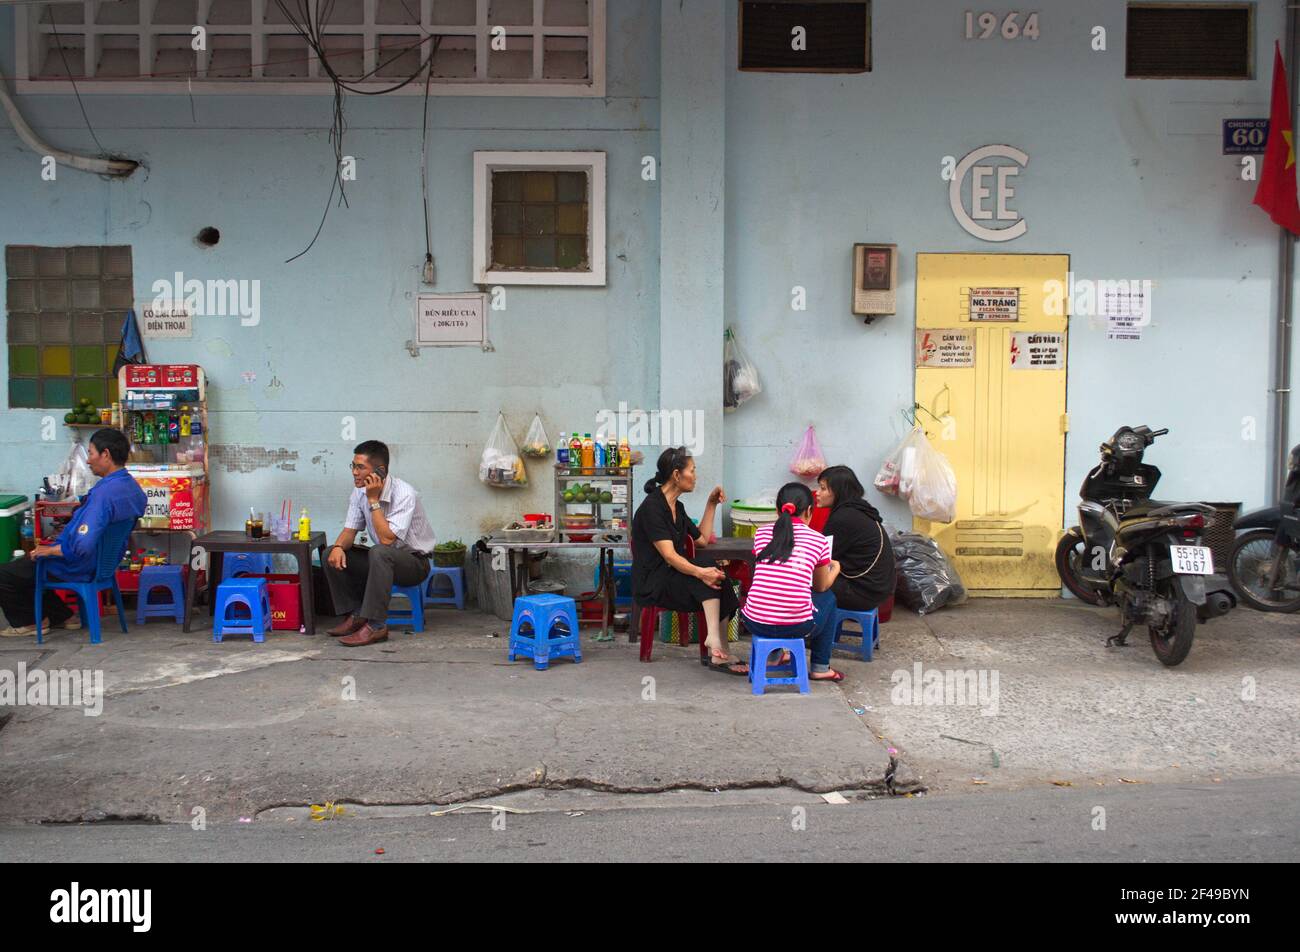 July, 2015 - Ho Chi Minh, Vietnam: People sitting on small chairs outside in street cafe along the road. Stock Photo